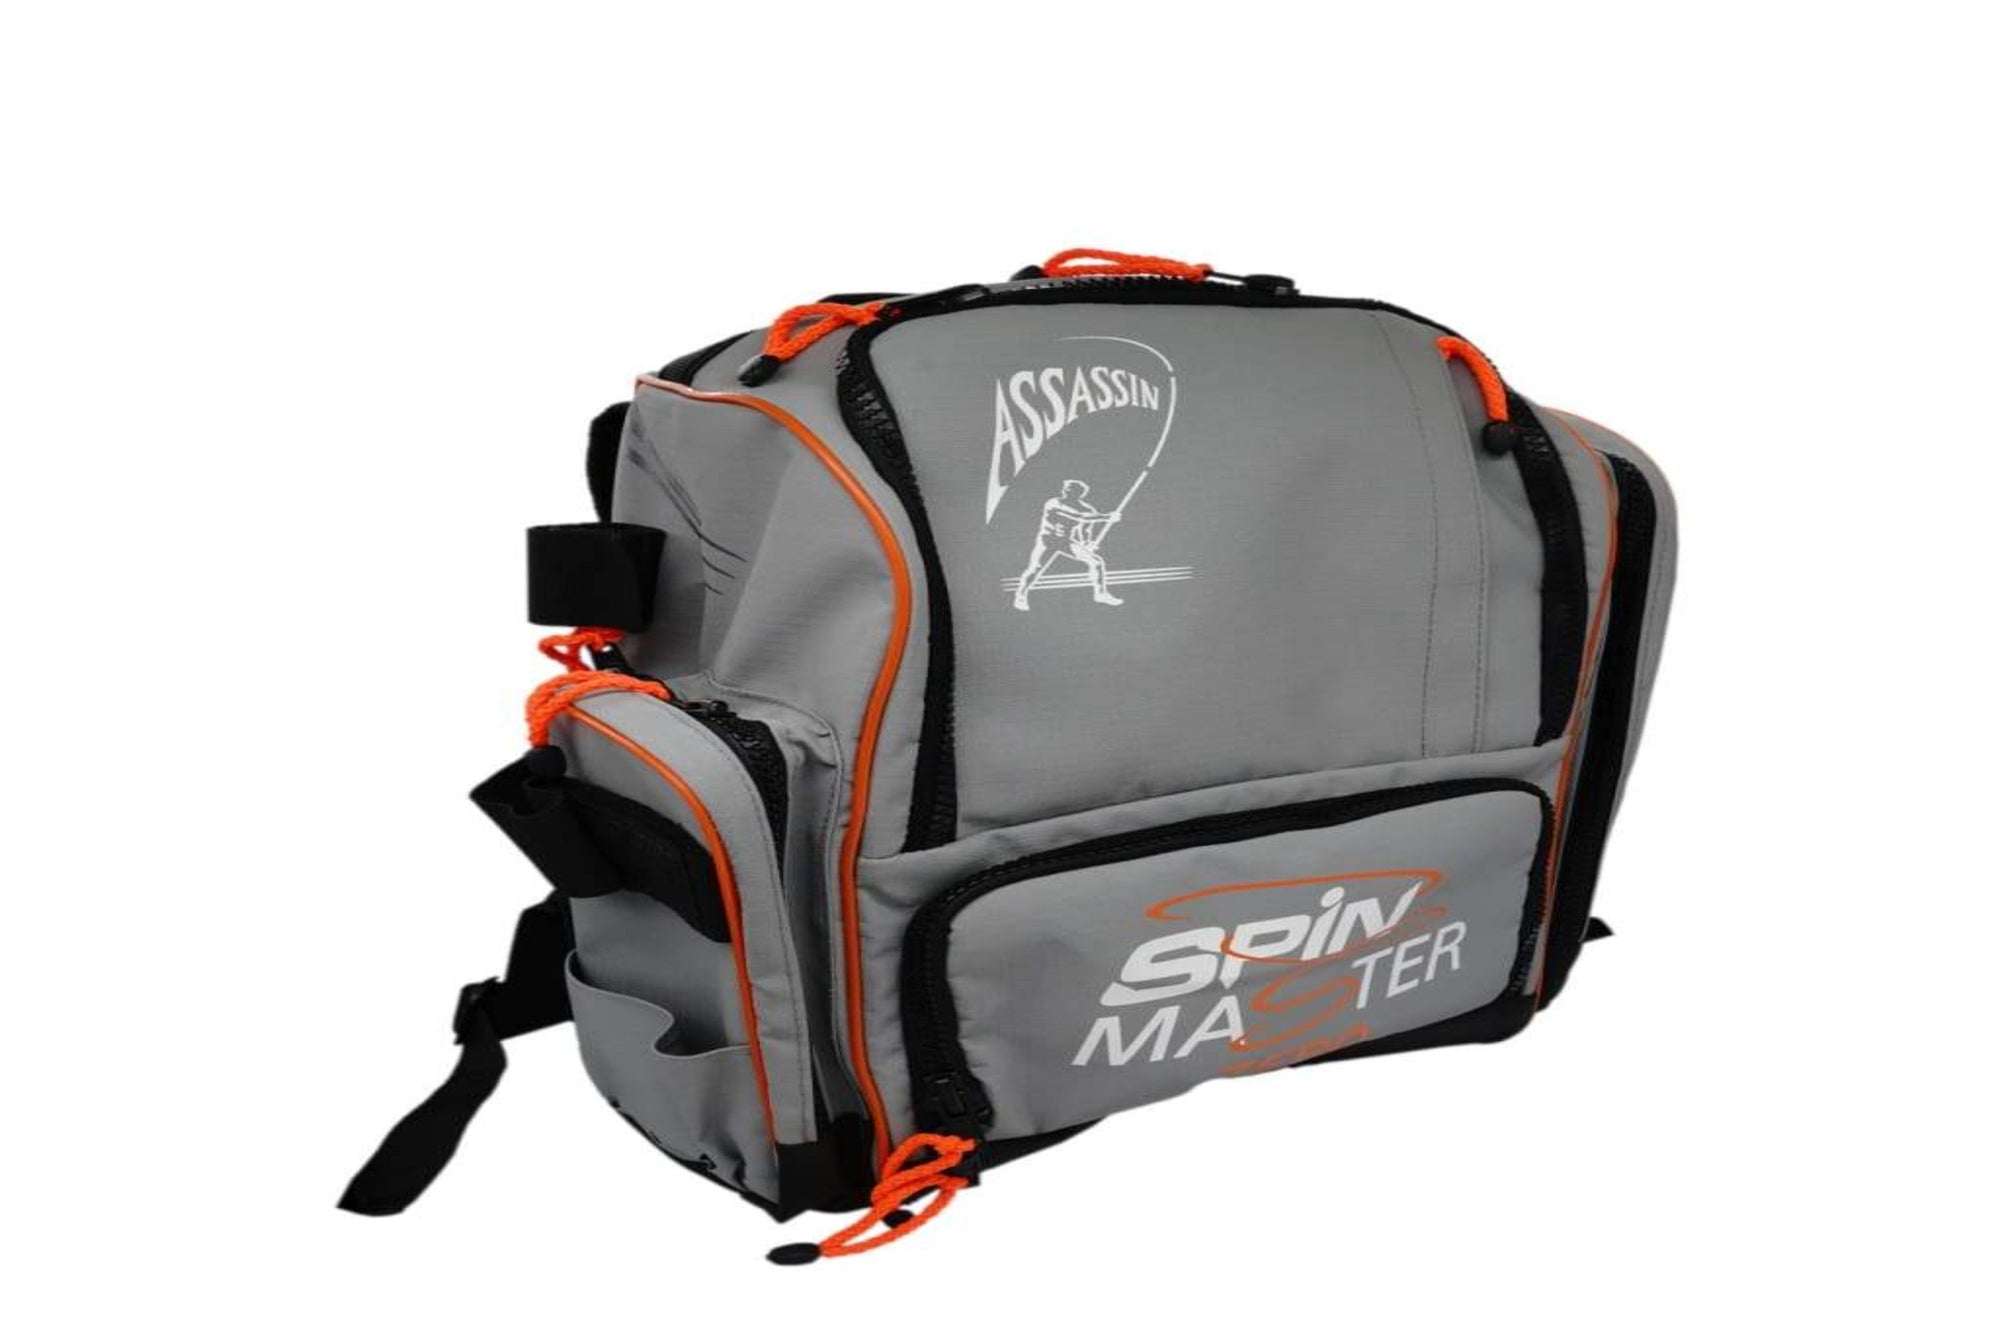 https://fishingstore.co.za/cdn/shop/products/assassin-spin-master-zero-backpack-accessories-allaccessories-bags-boxes-freshwater-saltwater-big-catch-fishing-tackle-bag-orange-luggage-486_2000x.jpg?v=1629268428